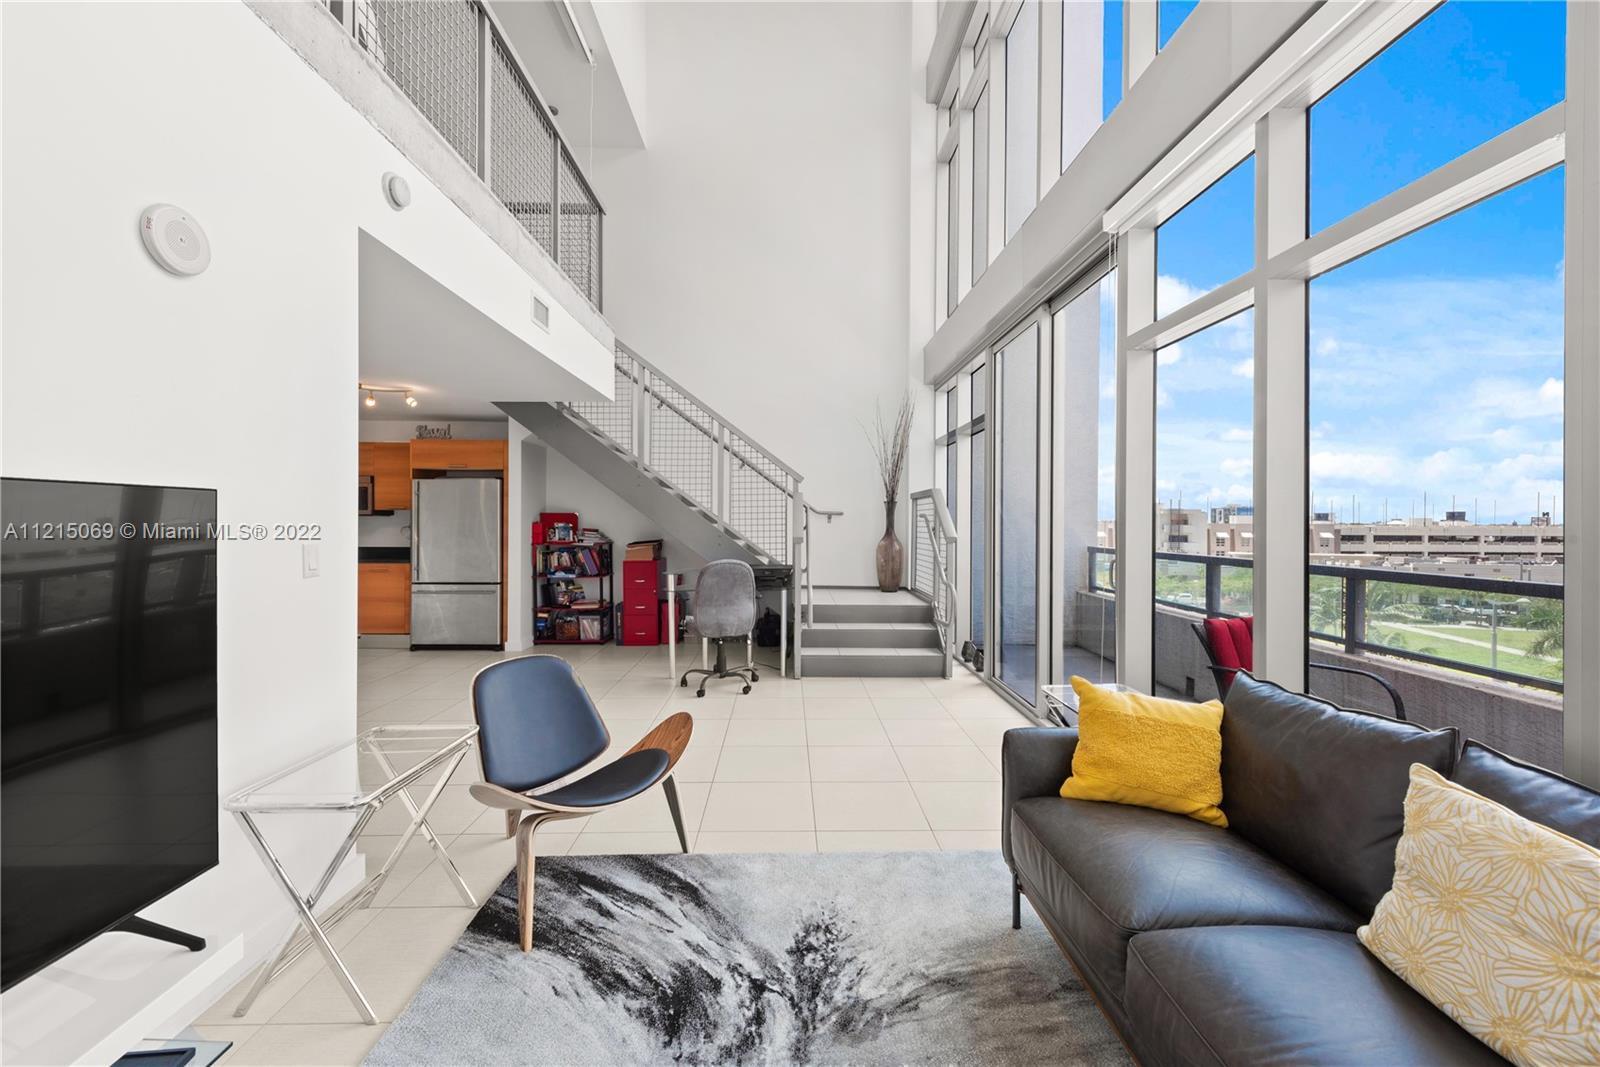 A Floor-to-ceiling 1 Bedrooms + 2 Full Bathrooms LOFT condo in the heart of Midtown, an urban design